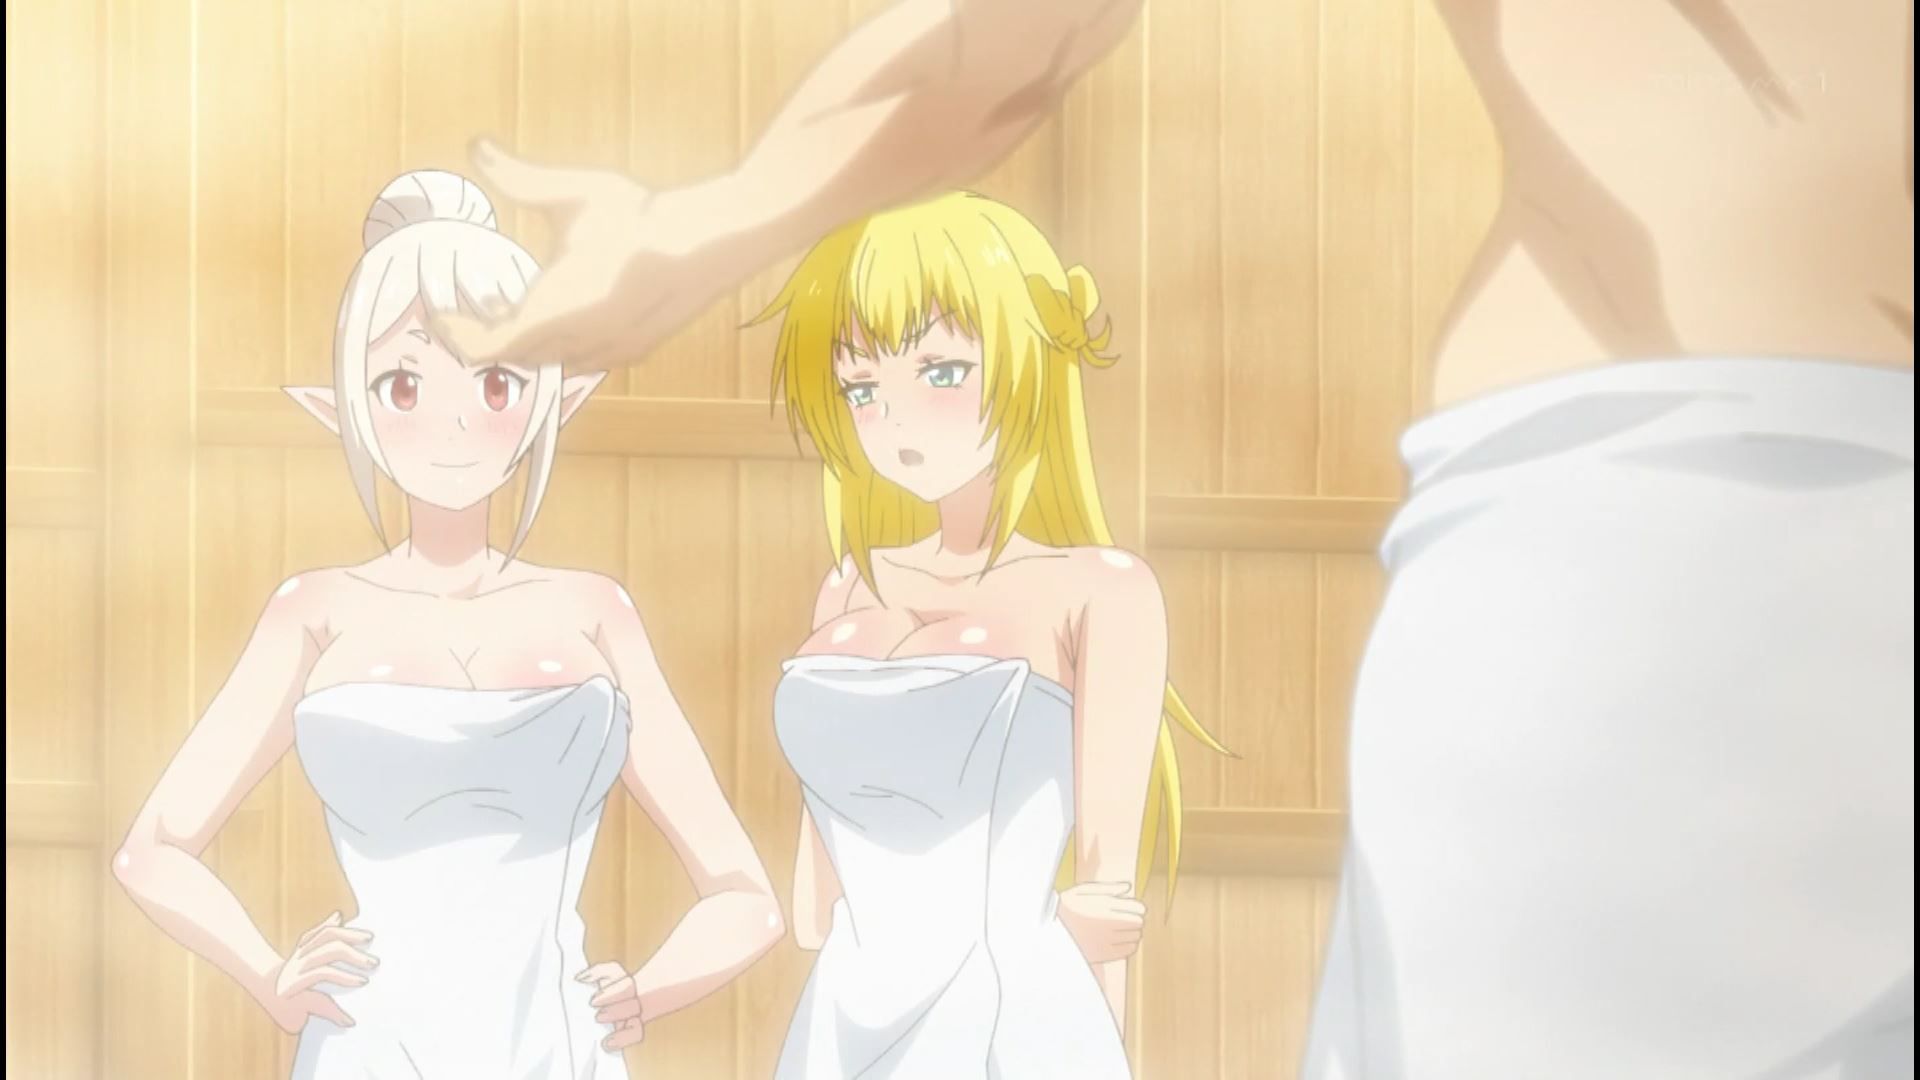 In episode 4 of the anime "True Companion", there is an erotic scene where you enter the sauna naked with an erotic boob girl! 13